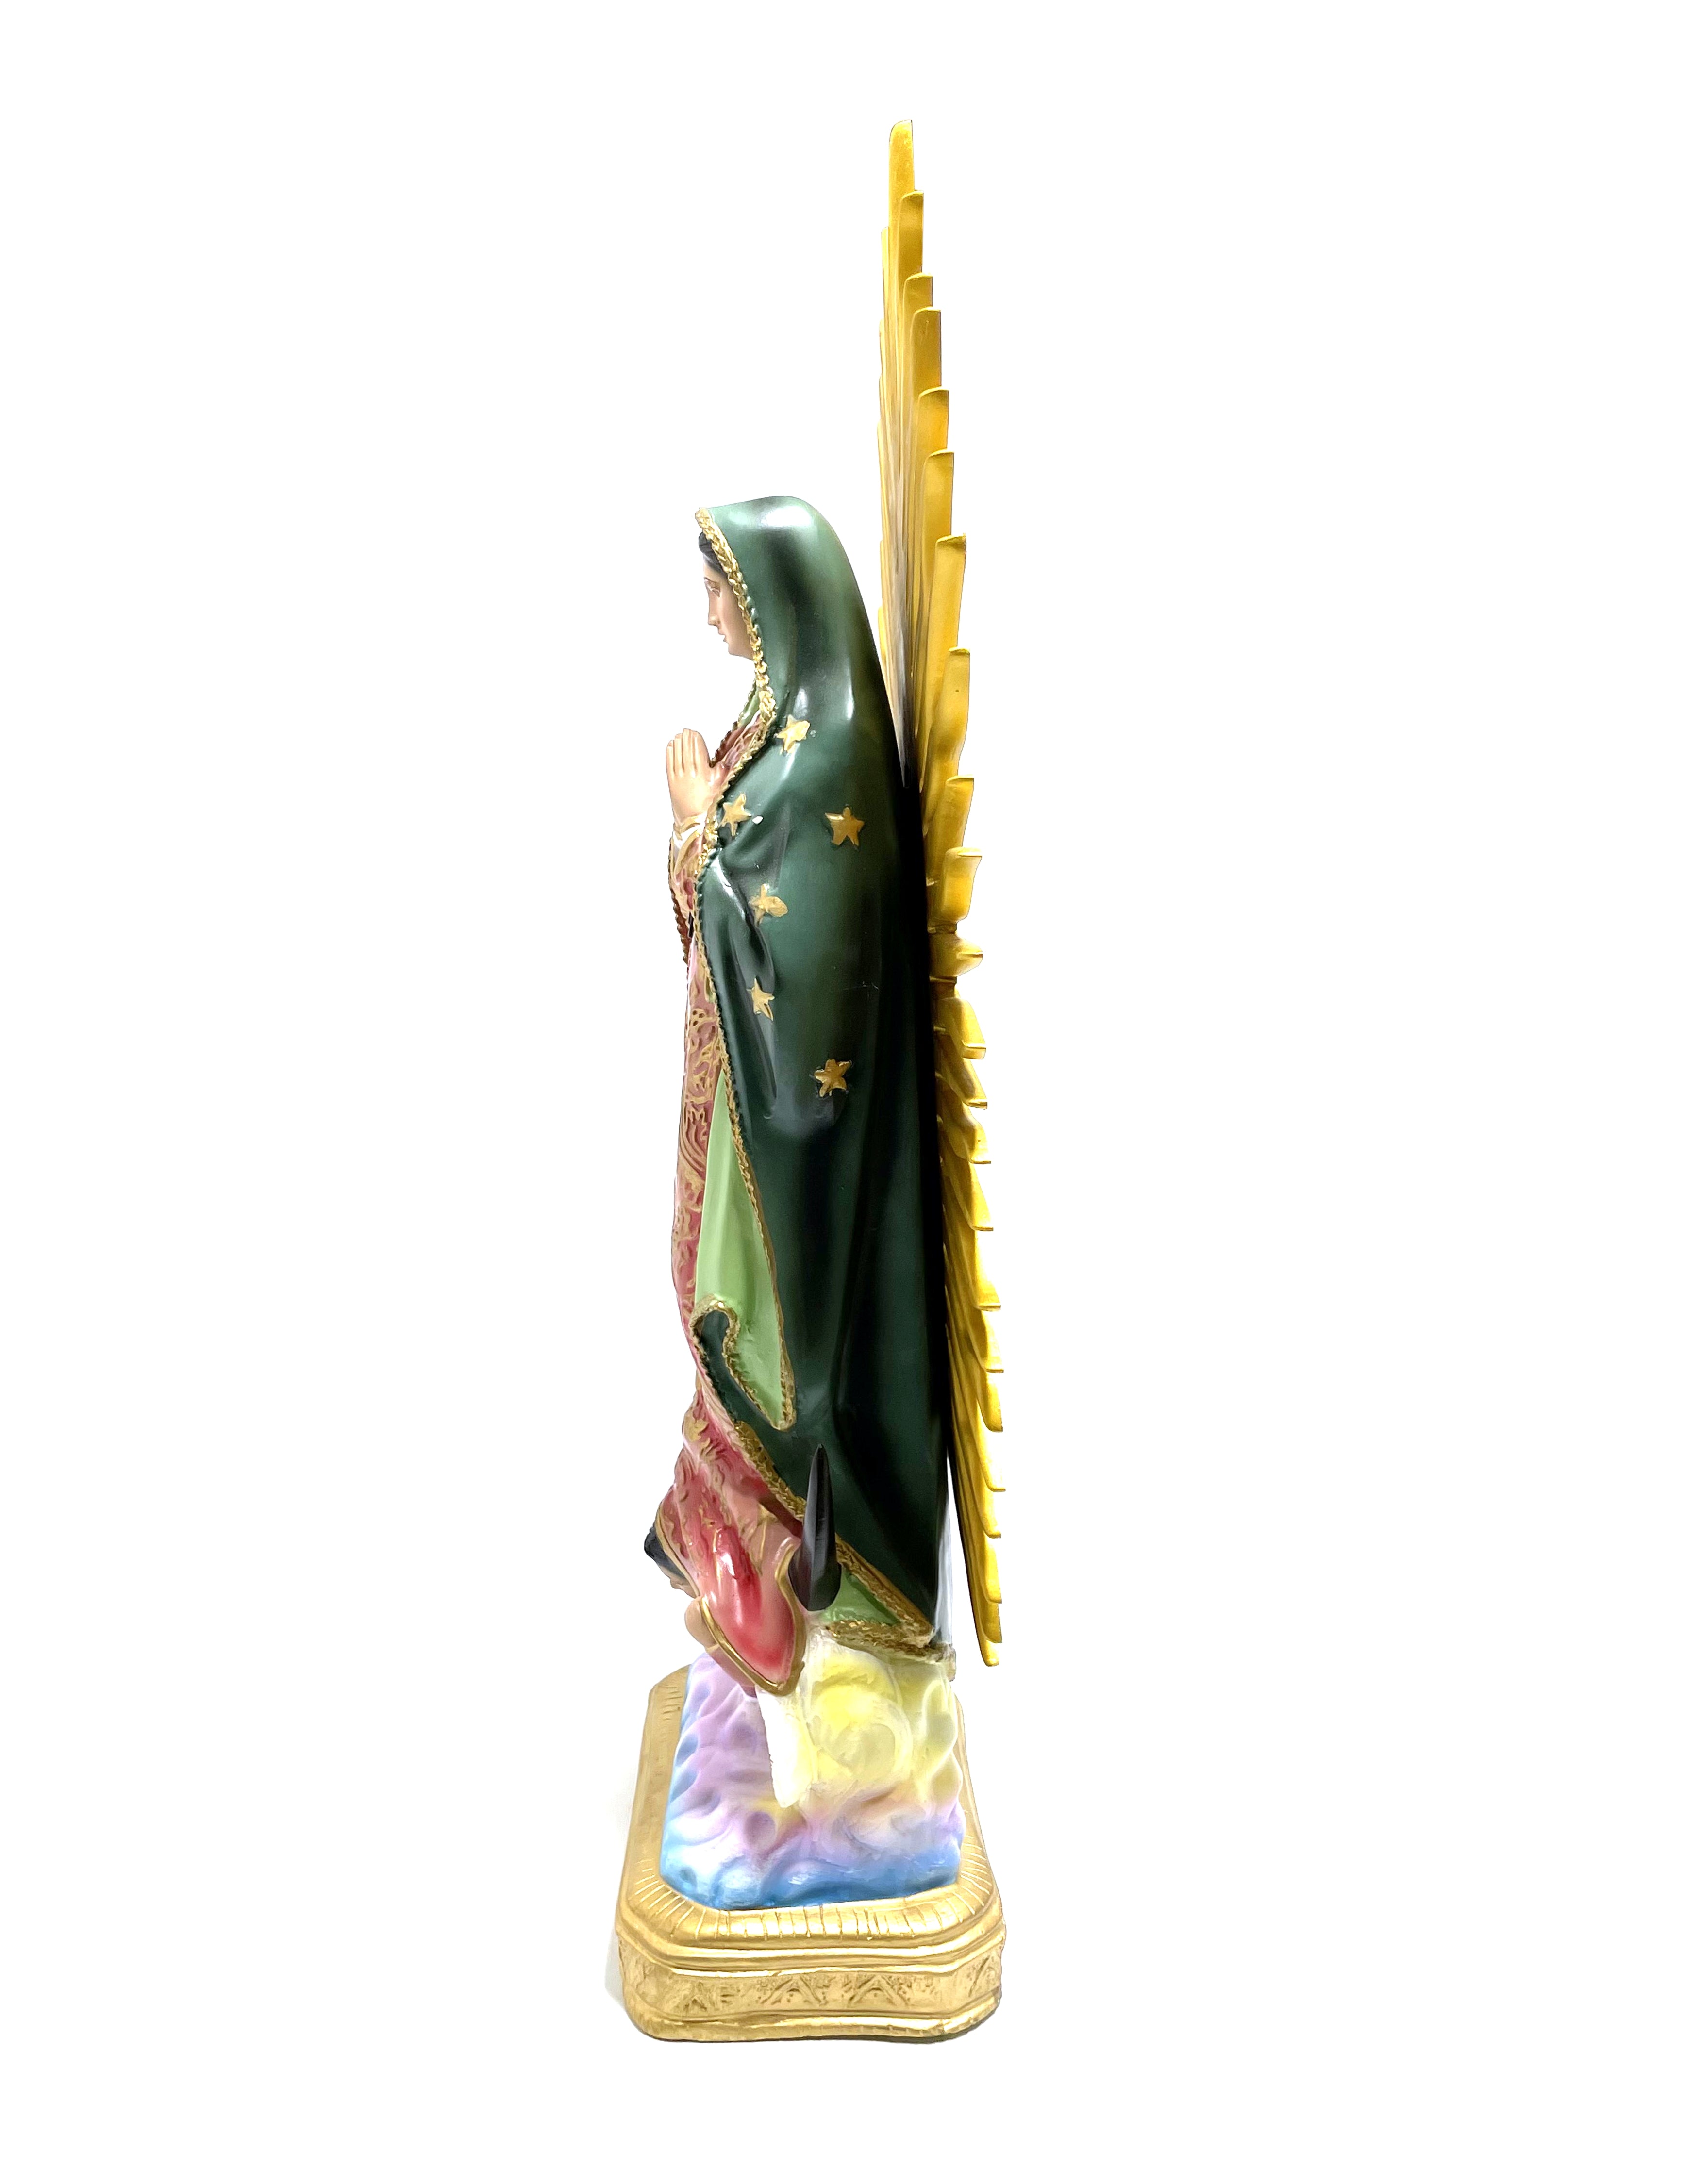 Religious statue of Our Lady of Guadalupe 23" height with gold rays